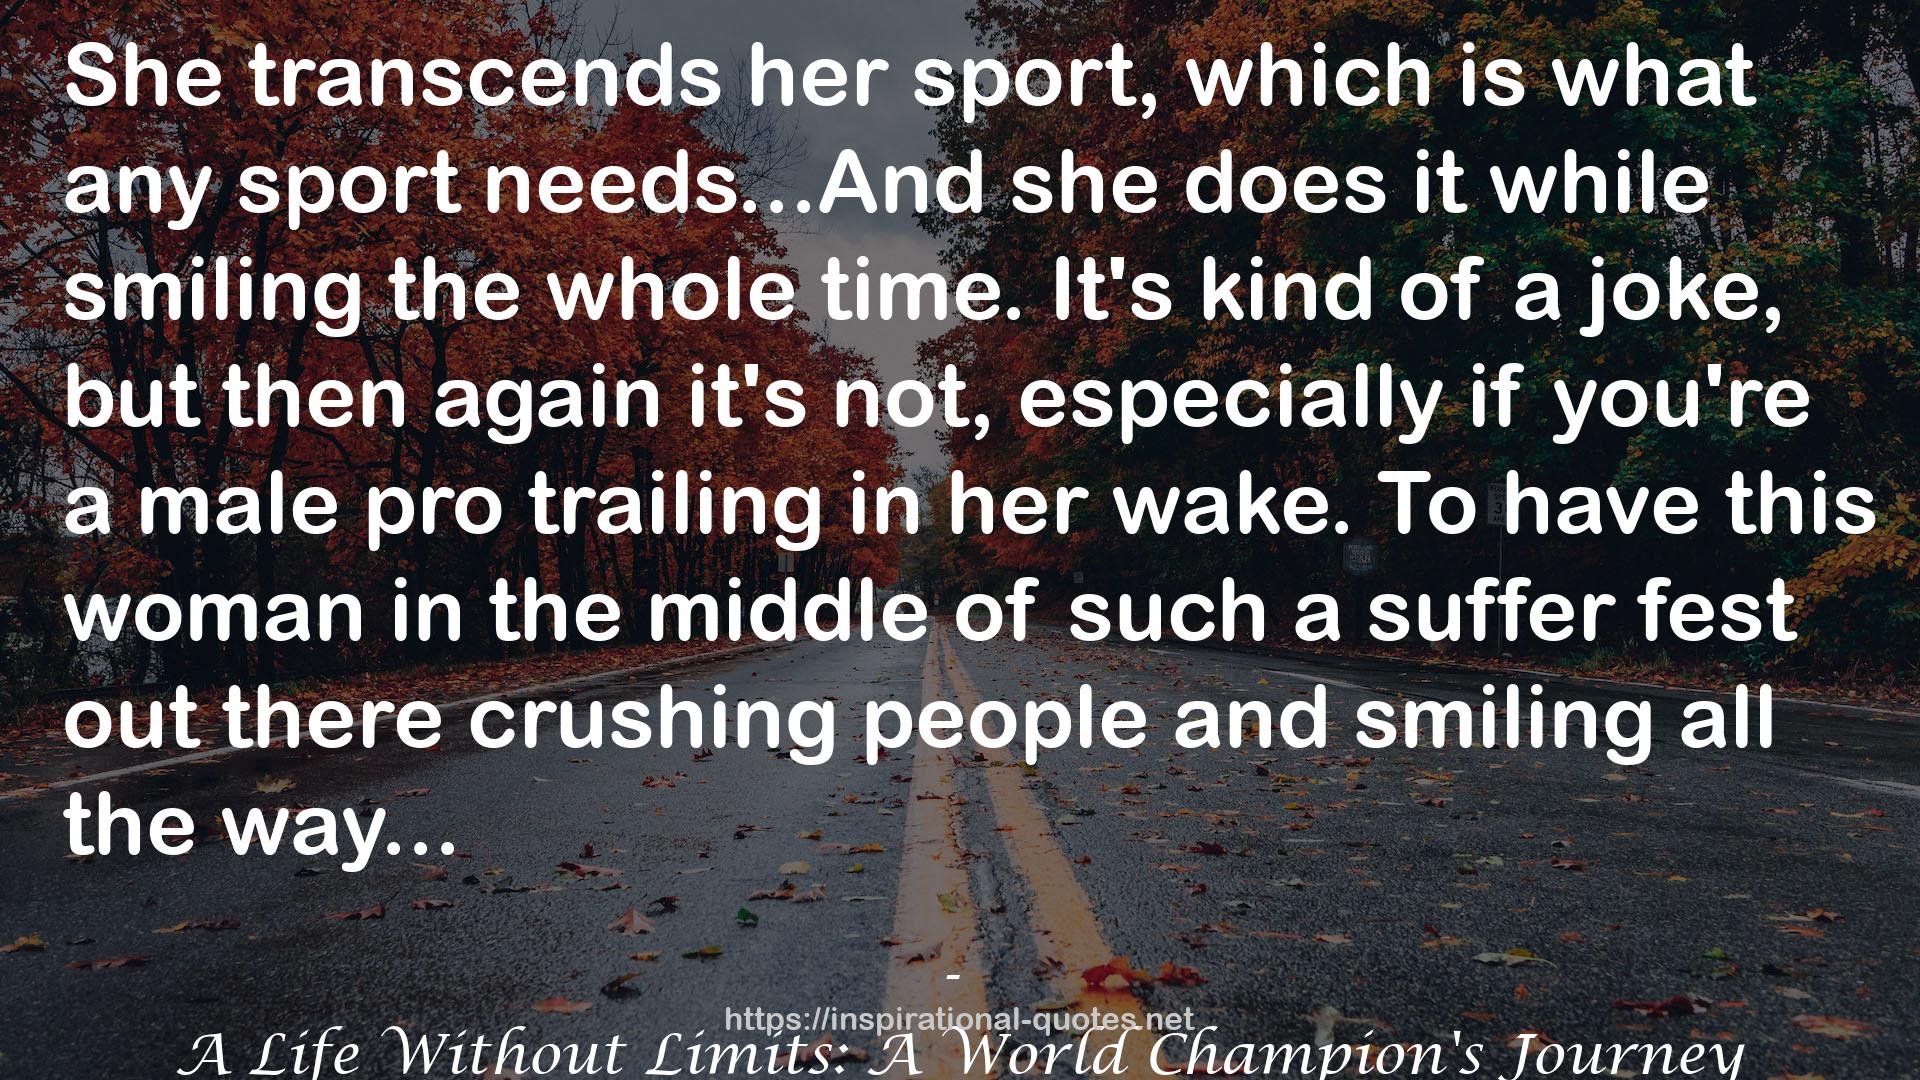 A Life Without Limits: A World Champion's Journey QUOTES